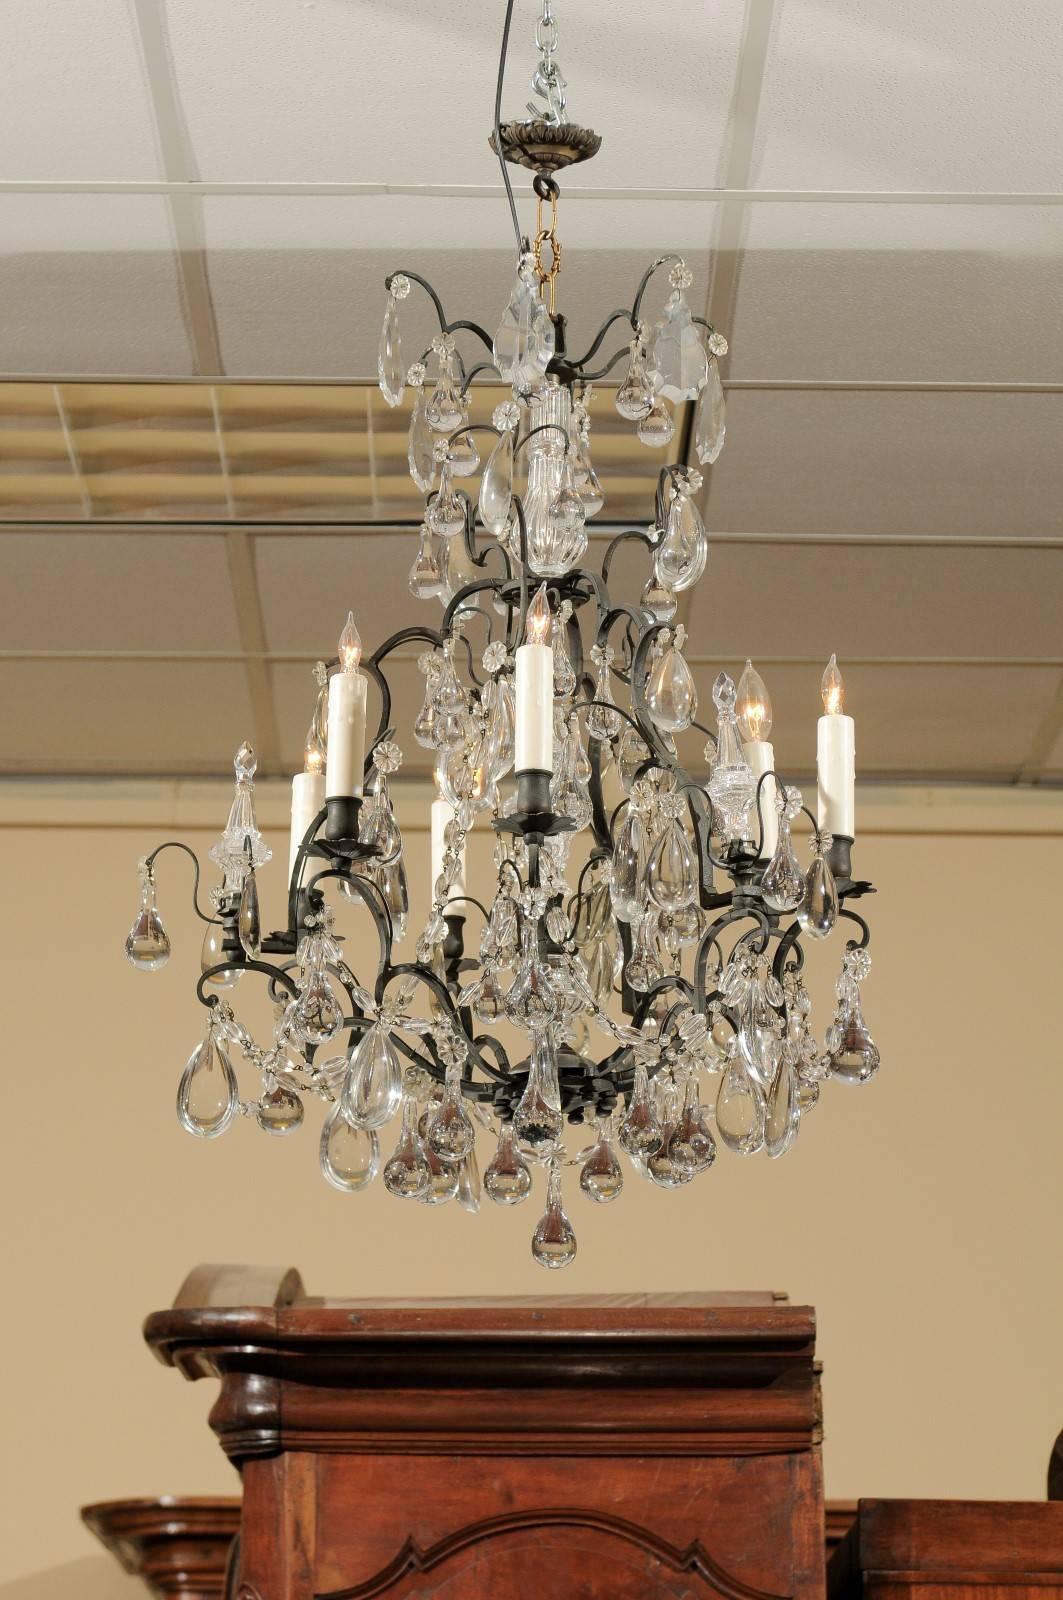 Louis XV style 6-light chandelier with black metal frame, clear crystals & drops, France circa 1890.